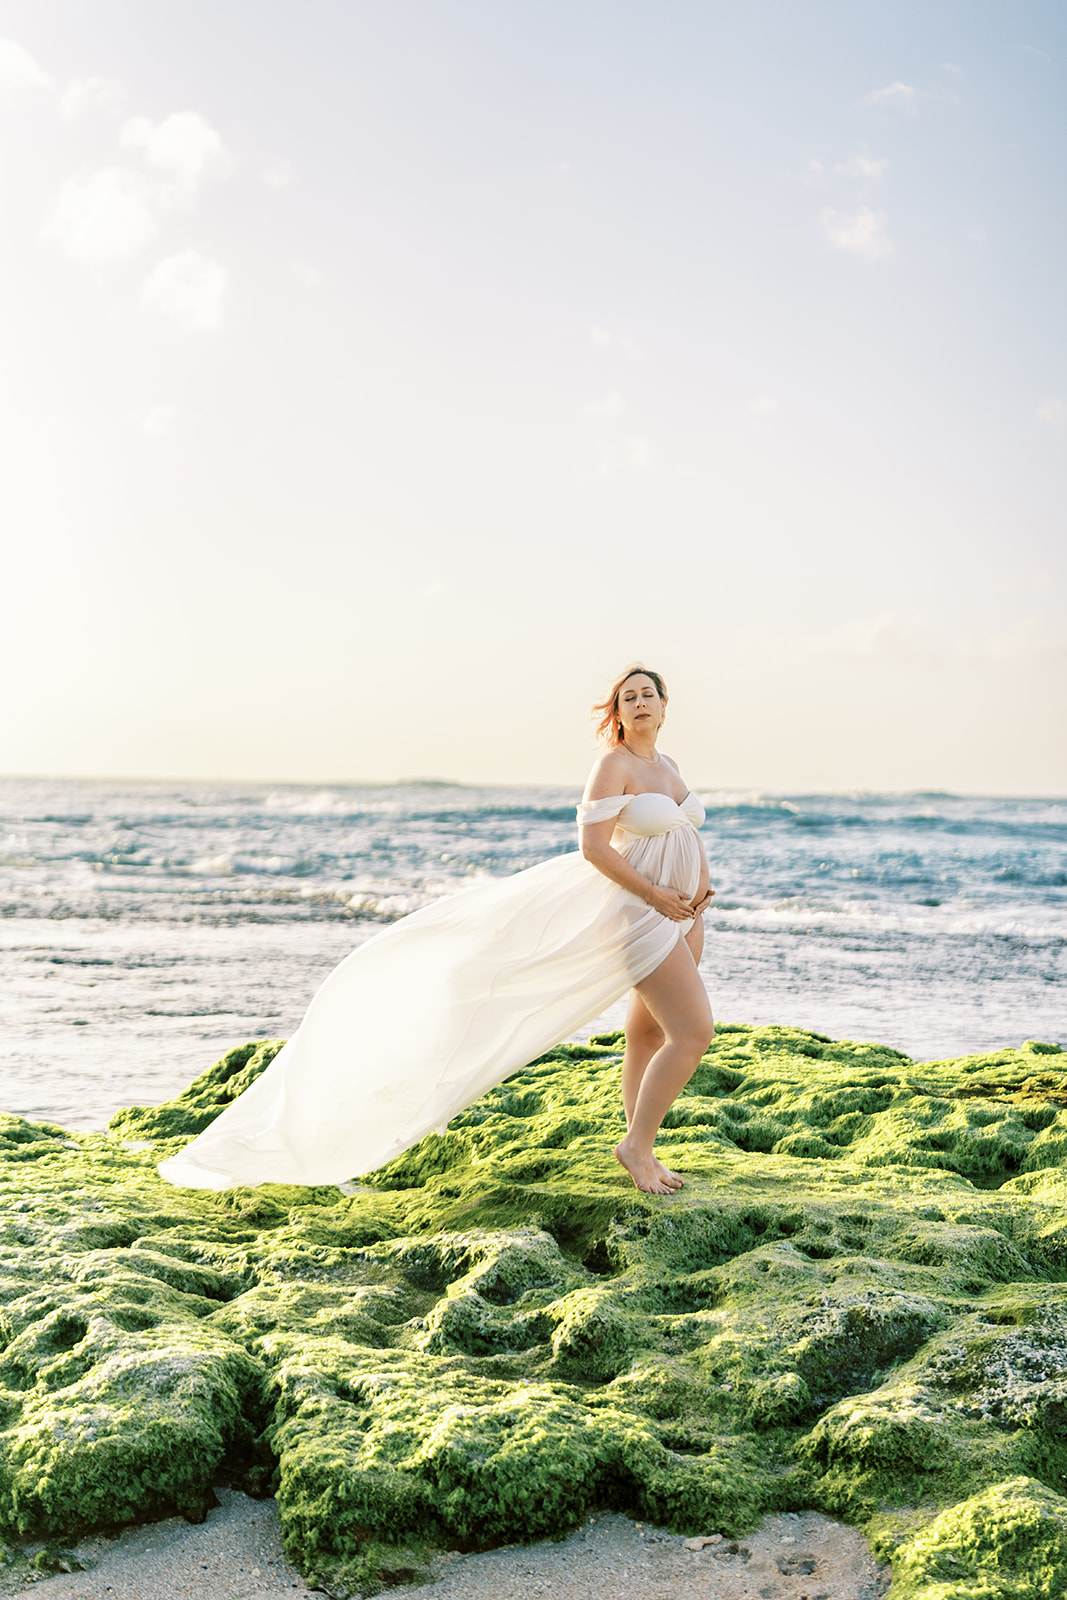 Pregnant woman in white flowing maternity outfit standing on a moss-covered rock by the sea during sunset.